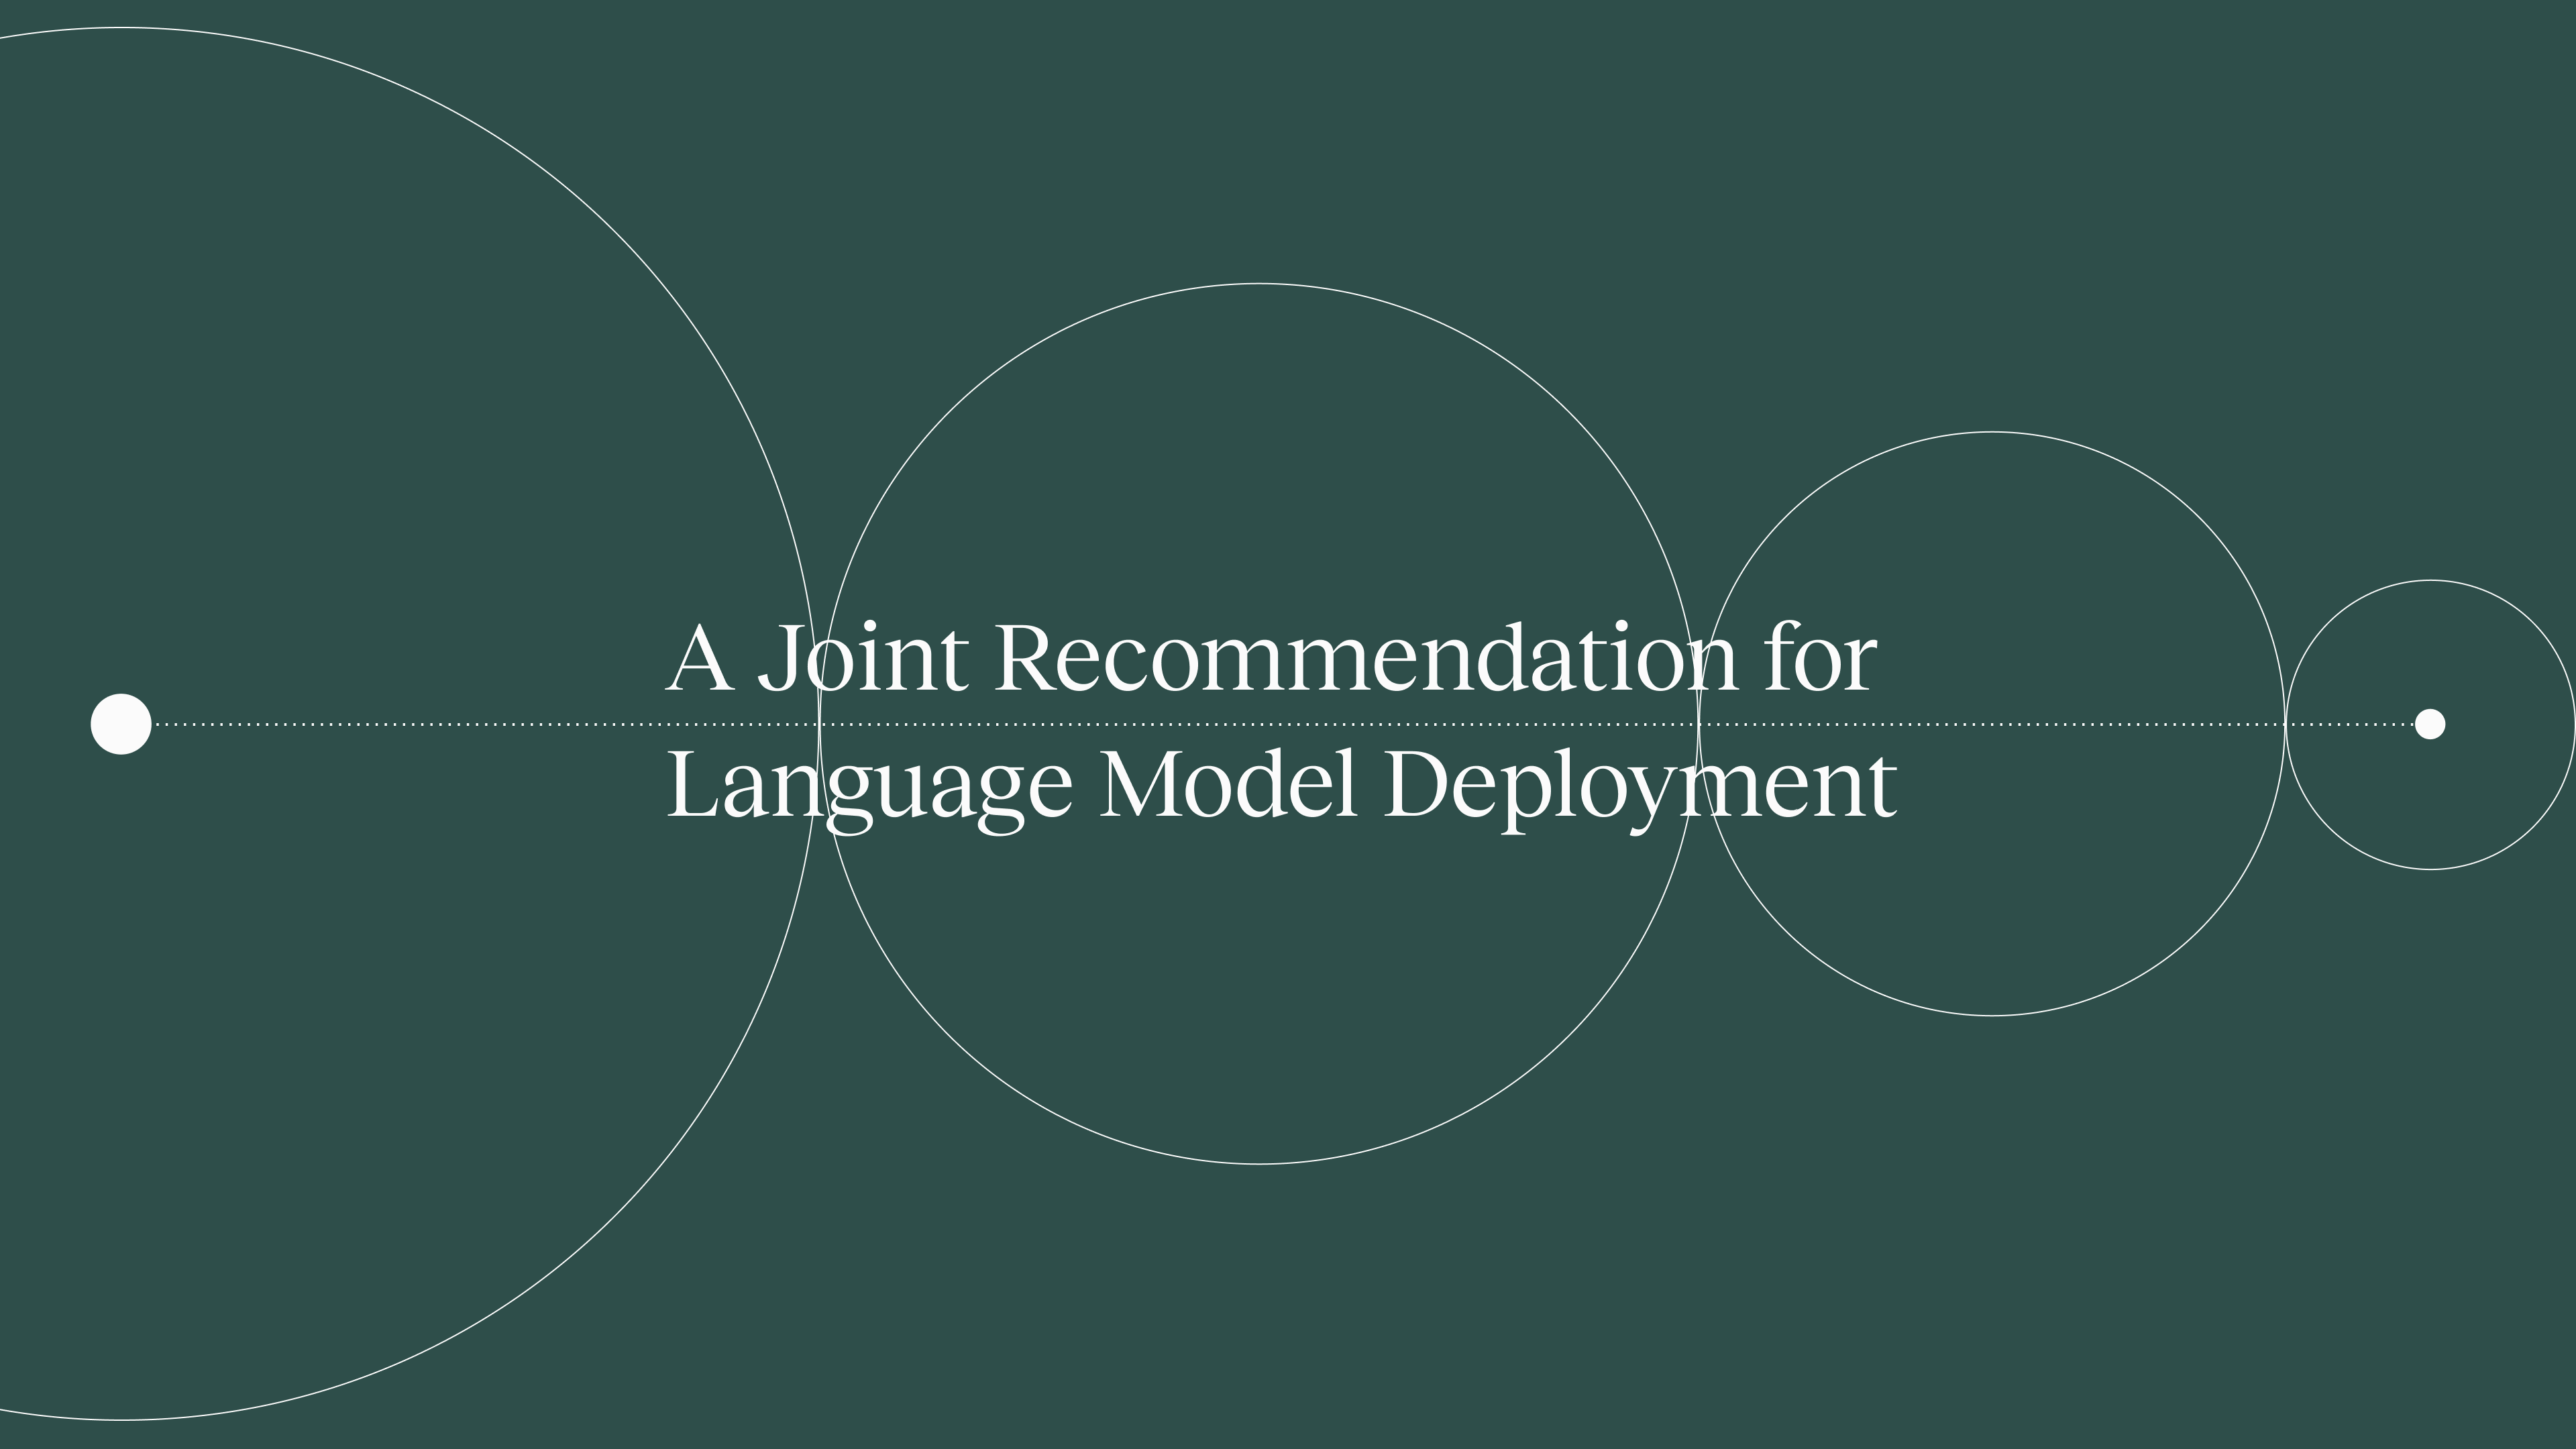 Best practices for deploying language models